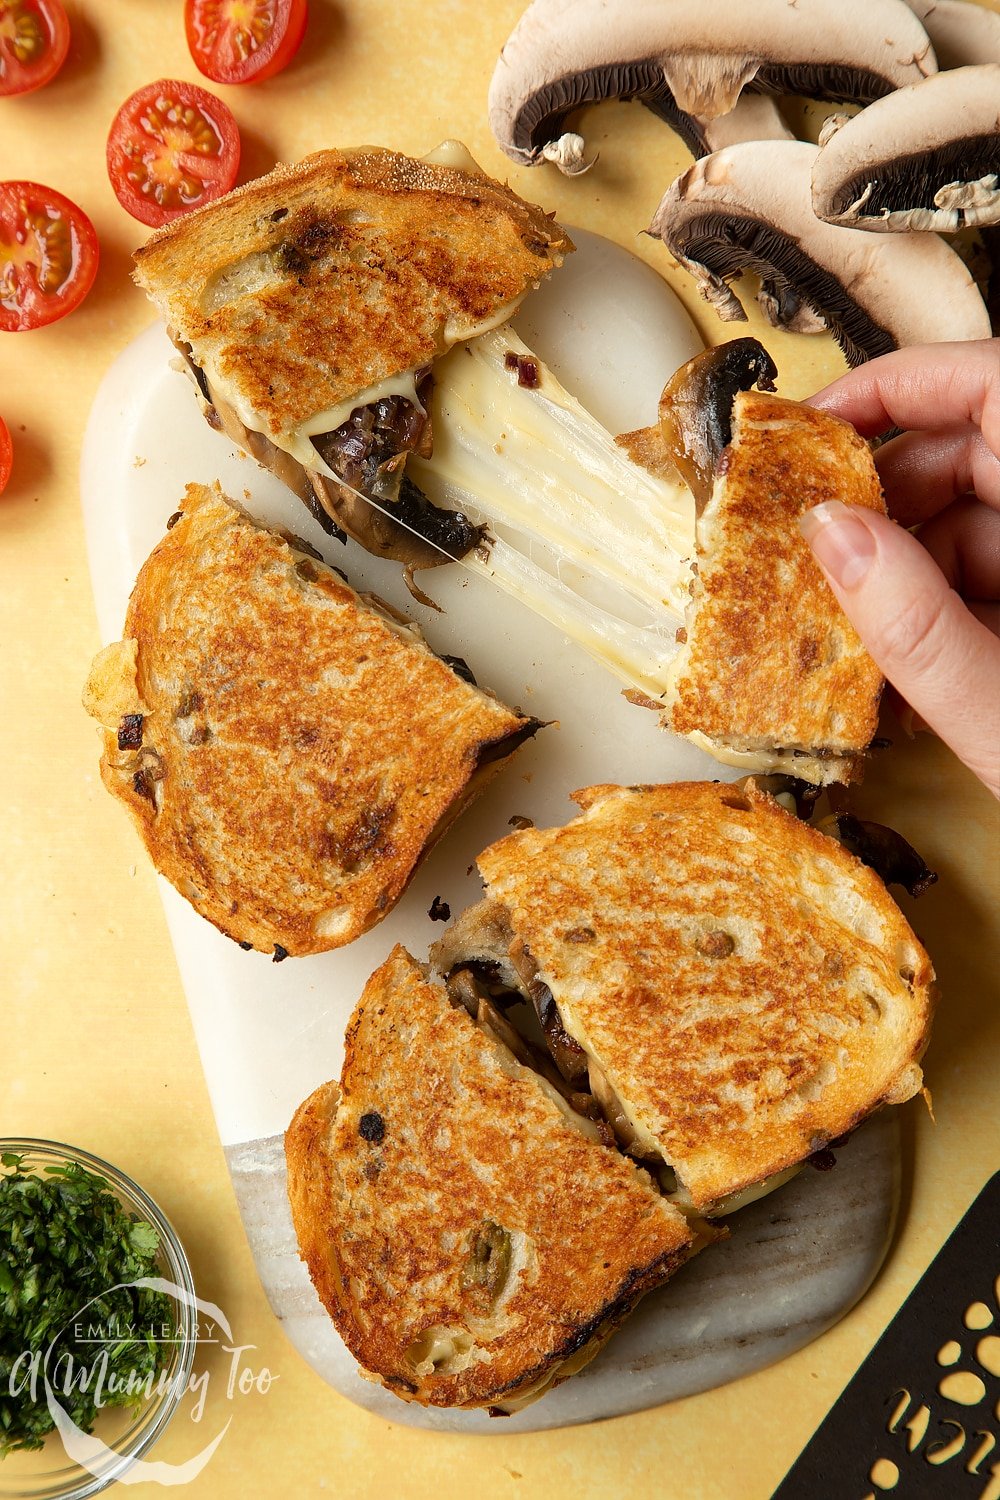 Two Jarlsberg cheese and mushroom toasties are on a serving board, one is being pulled apart very wide, the cheese is stretching between them almost to the point of breaking.